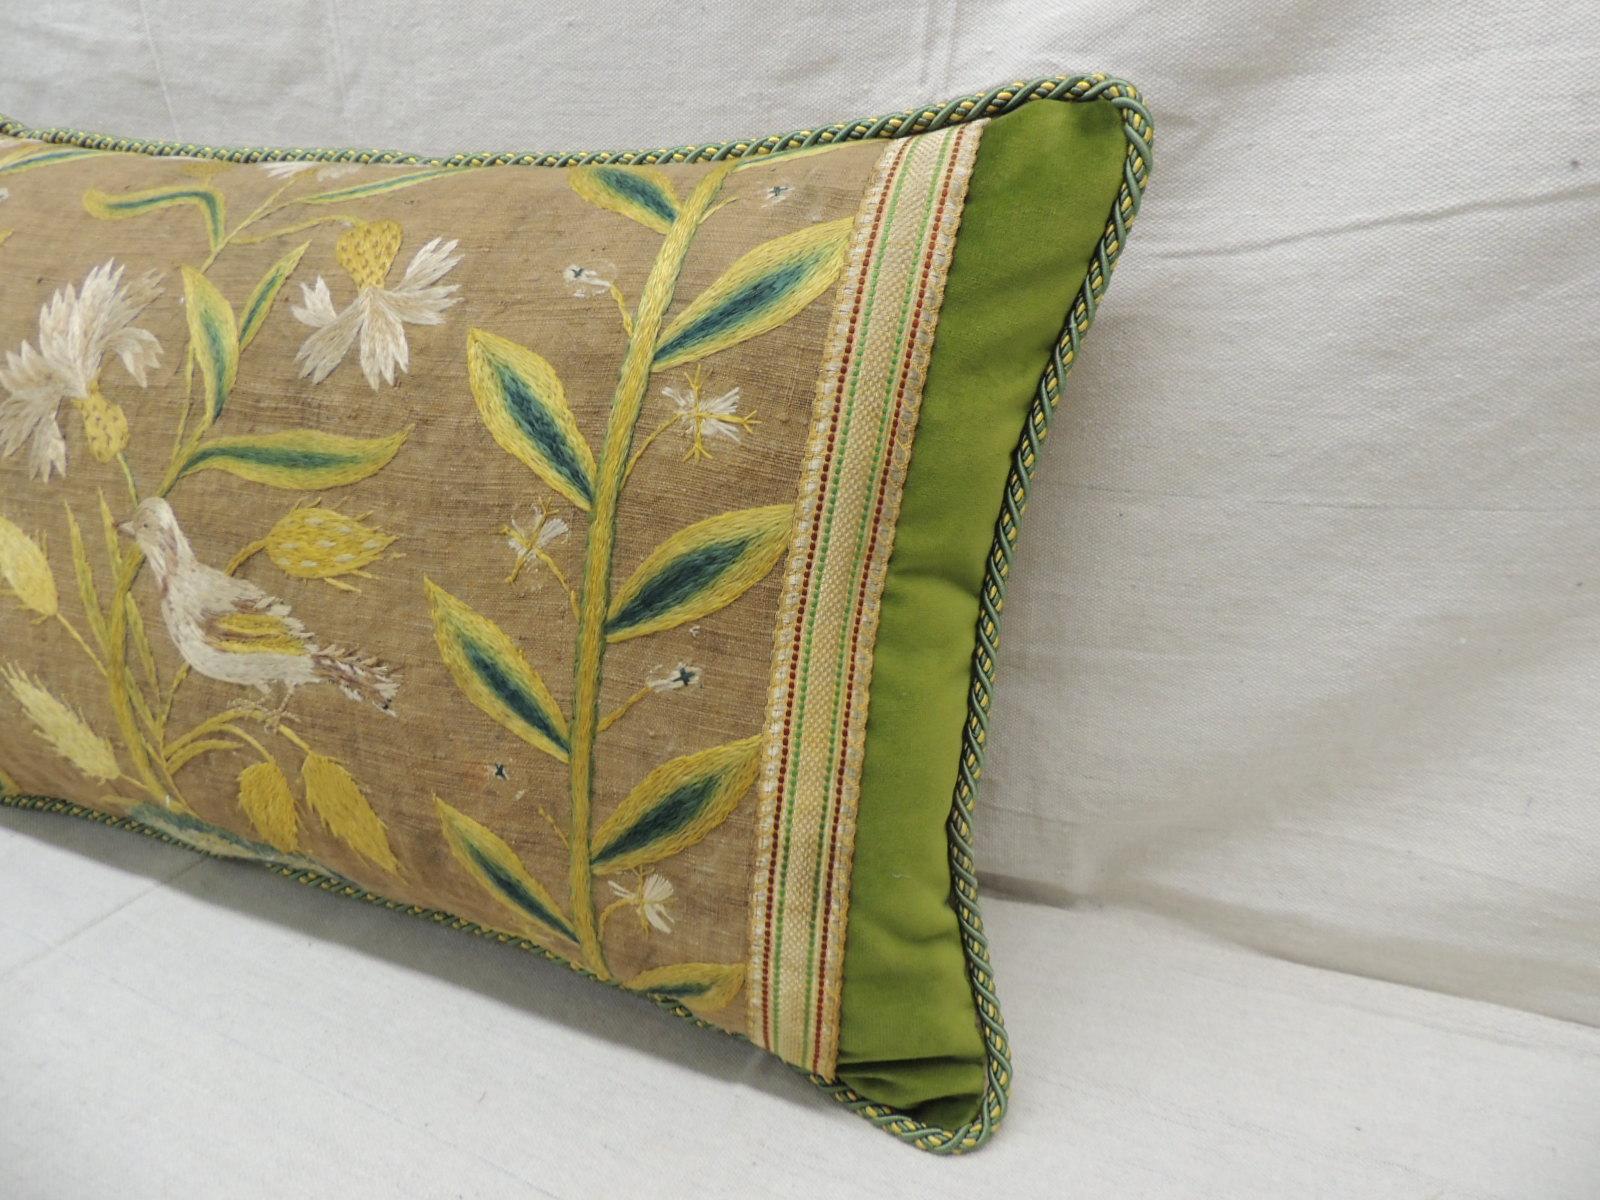 Italian Antique Venetian Yellow and Green Floral Embroidered Bolster Decorative Pillow